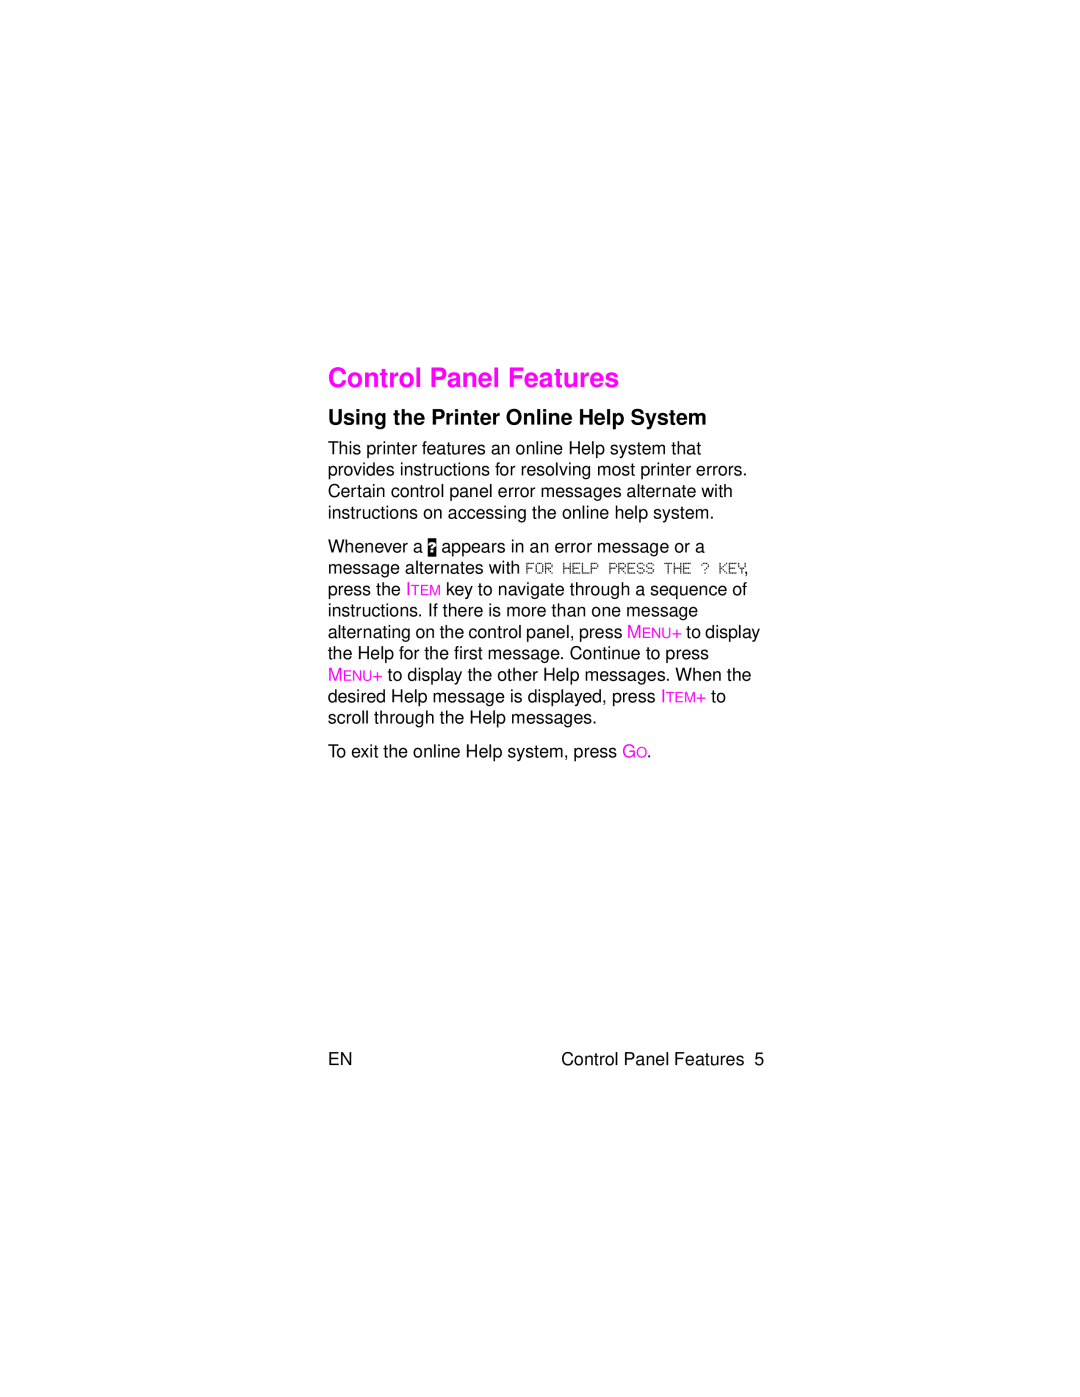 HP 8000 s manual Control Panel Features, Using the Printer Online Help System 